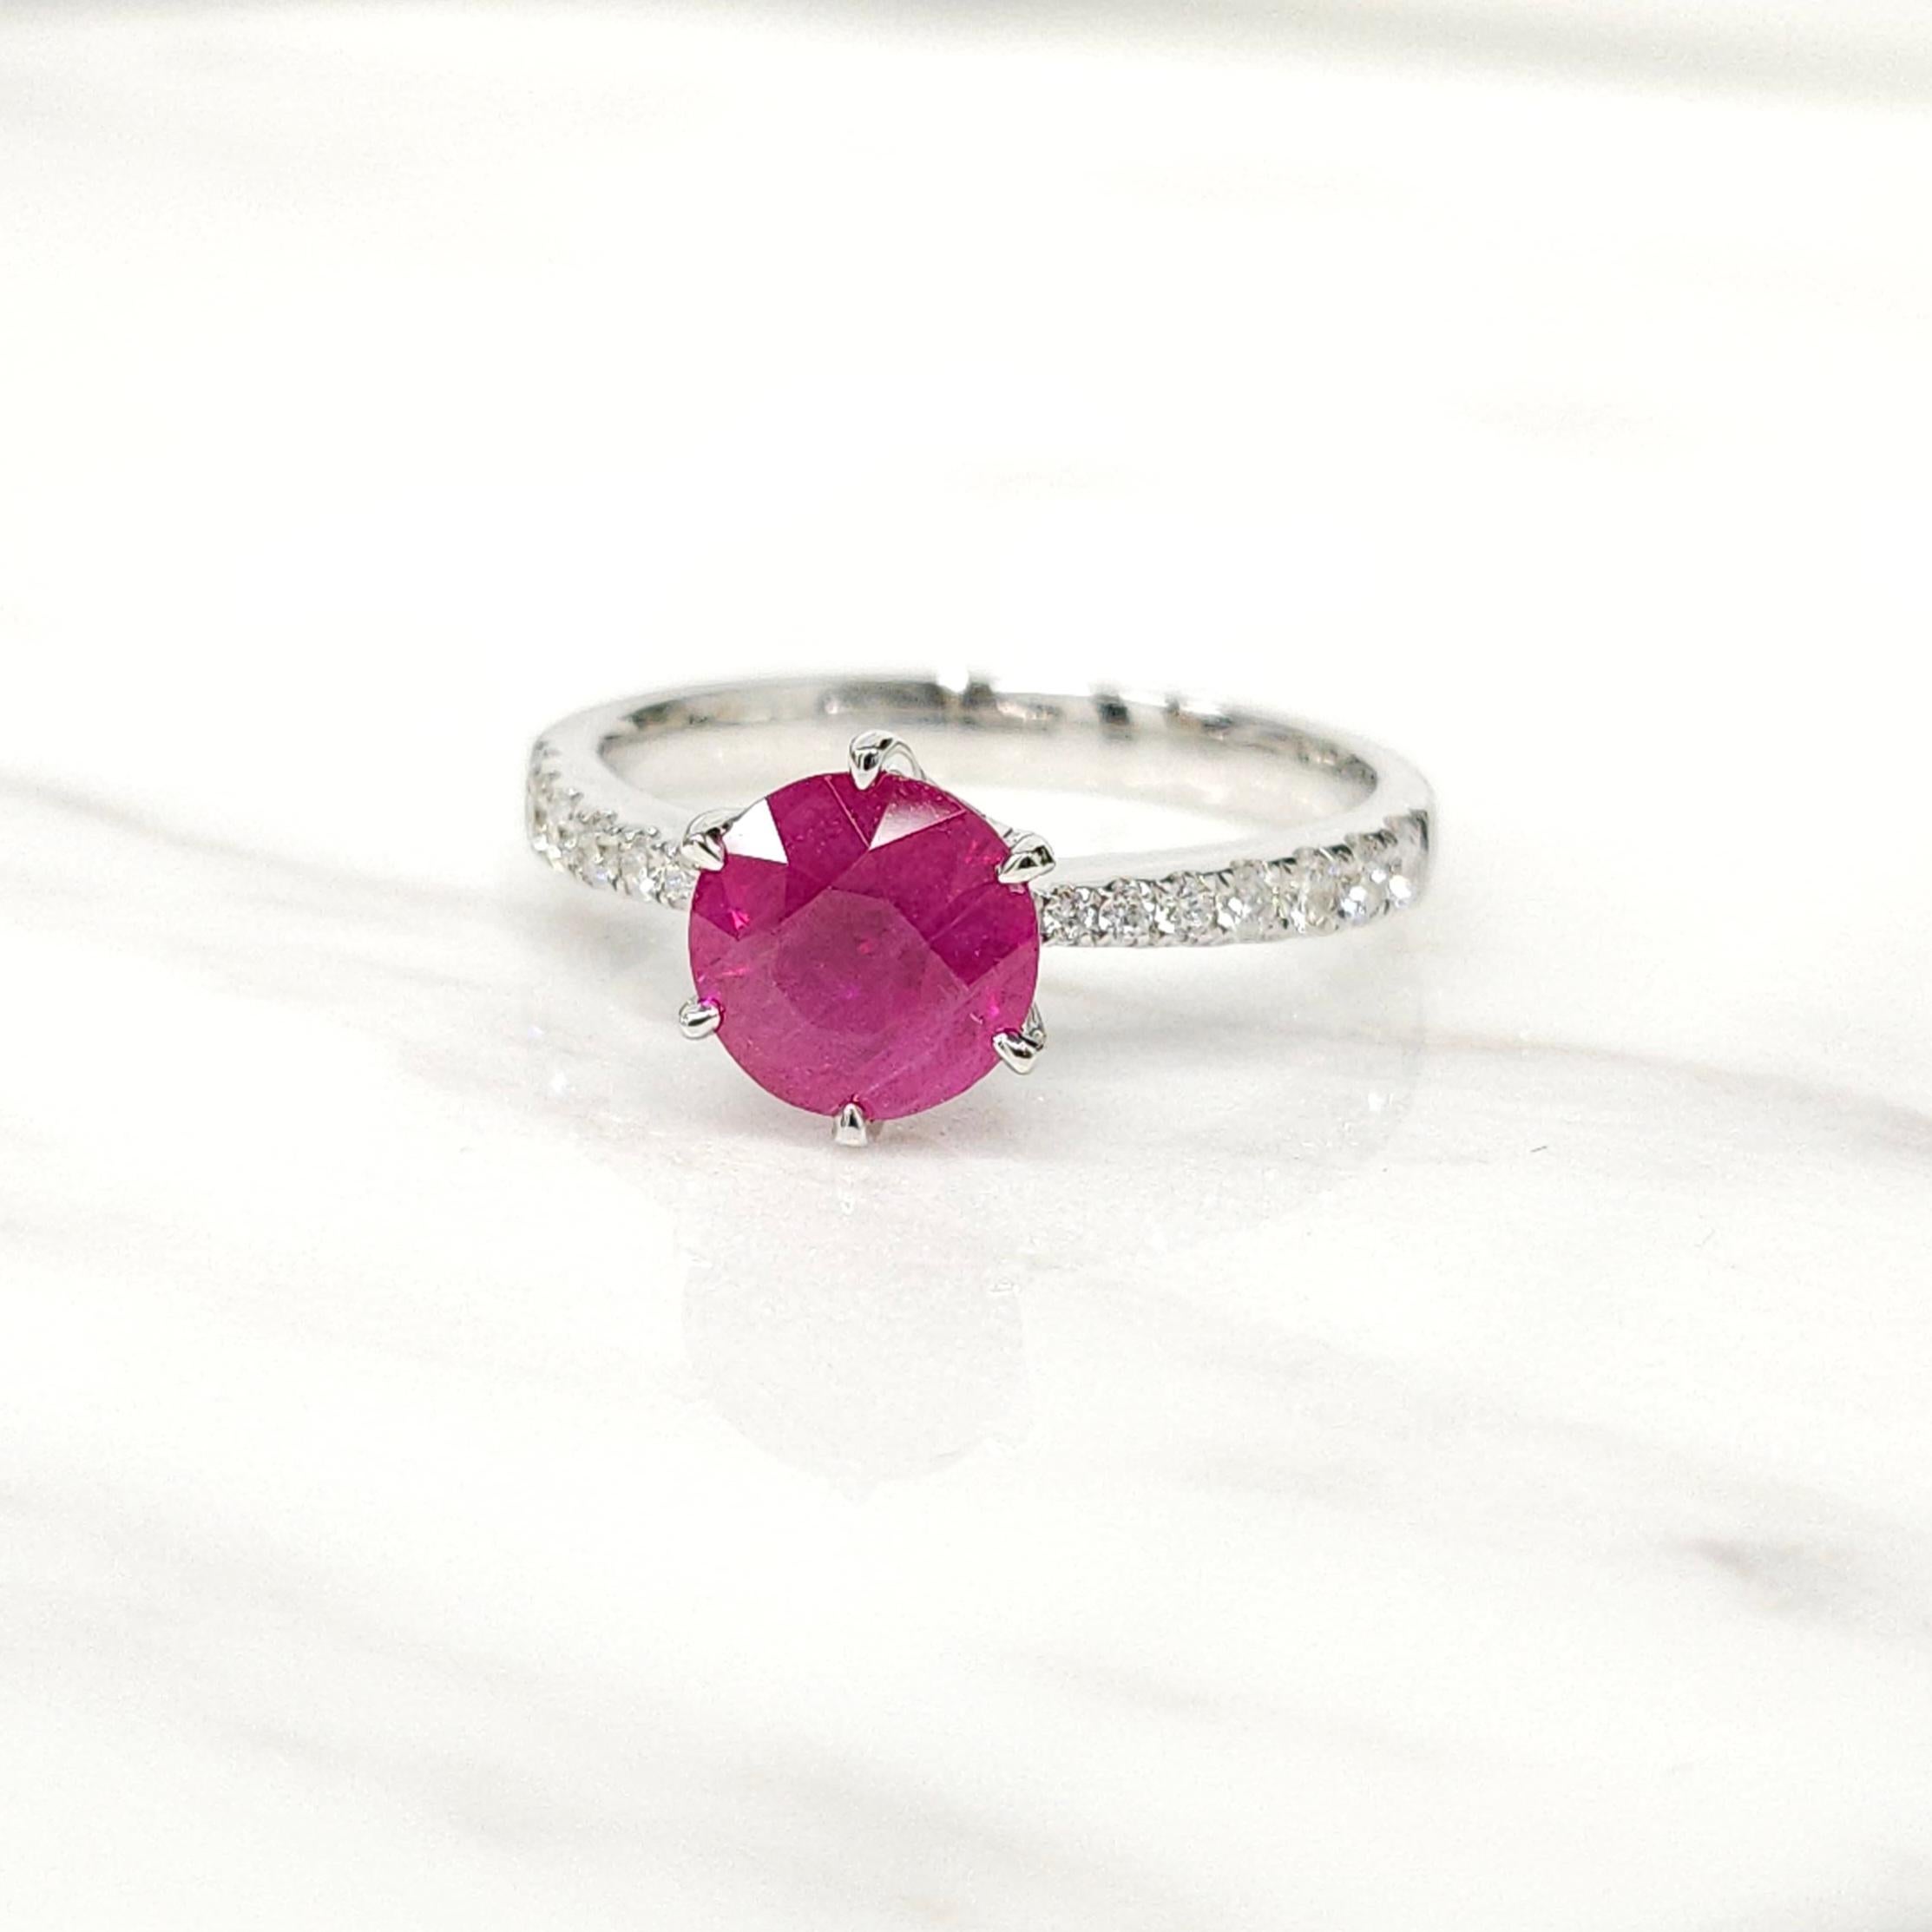 Experience the allure of this IGI Certified 1.70 Carat Ruby in an intense pinkish purplish red color, encased in an elegant 6-prong setting with exquisite natural diamonds, all set in a classic 18K white gold ring. The timeless beauty of this piece